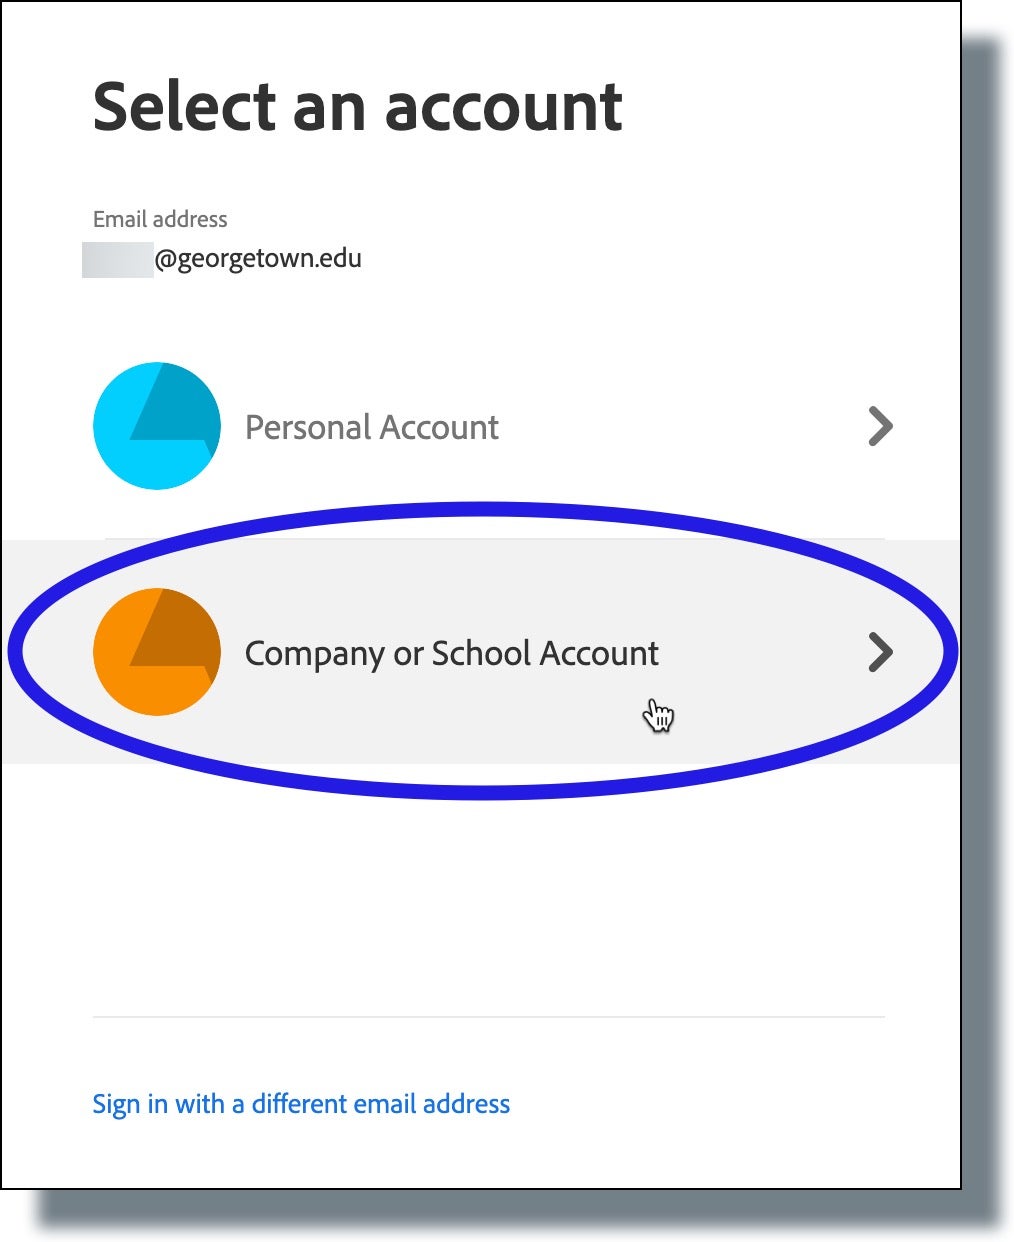 Select 'Company or School Account'